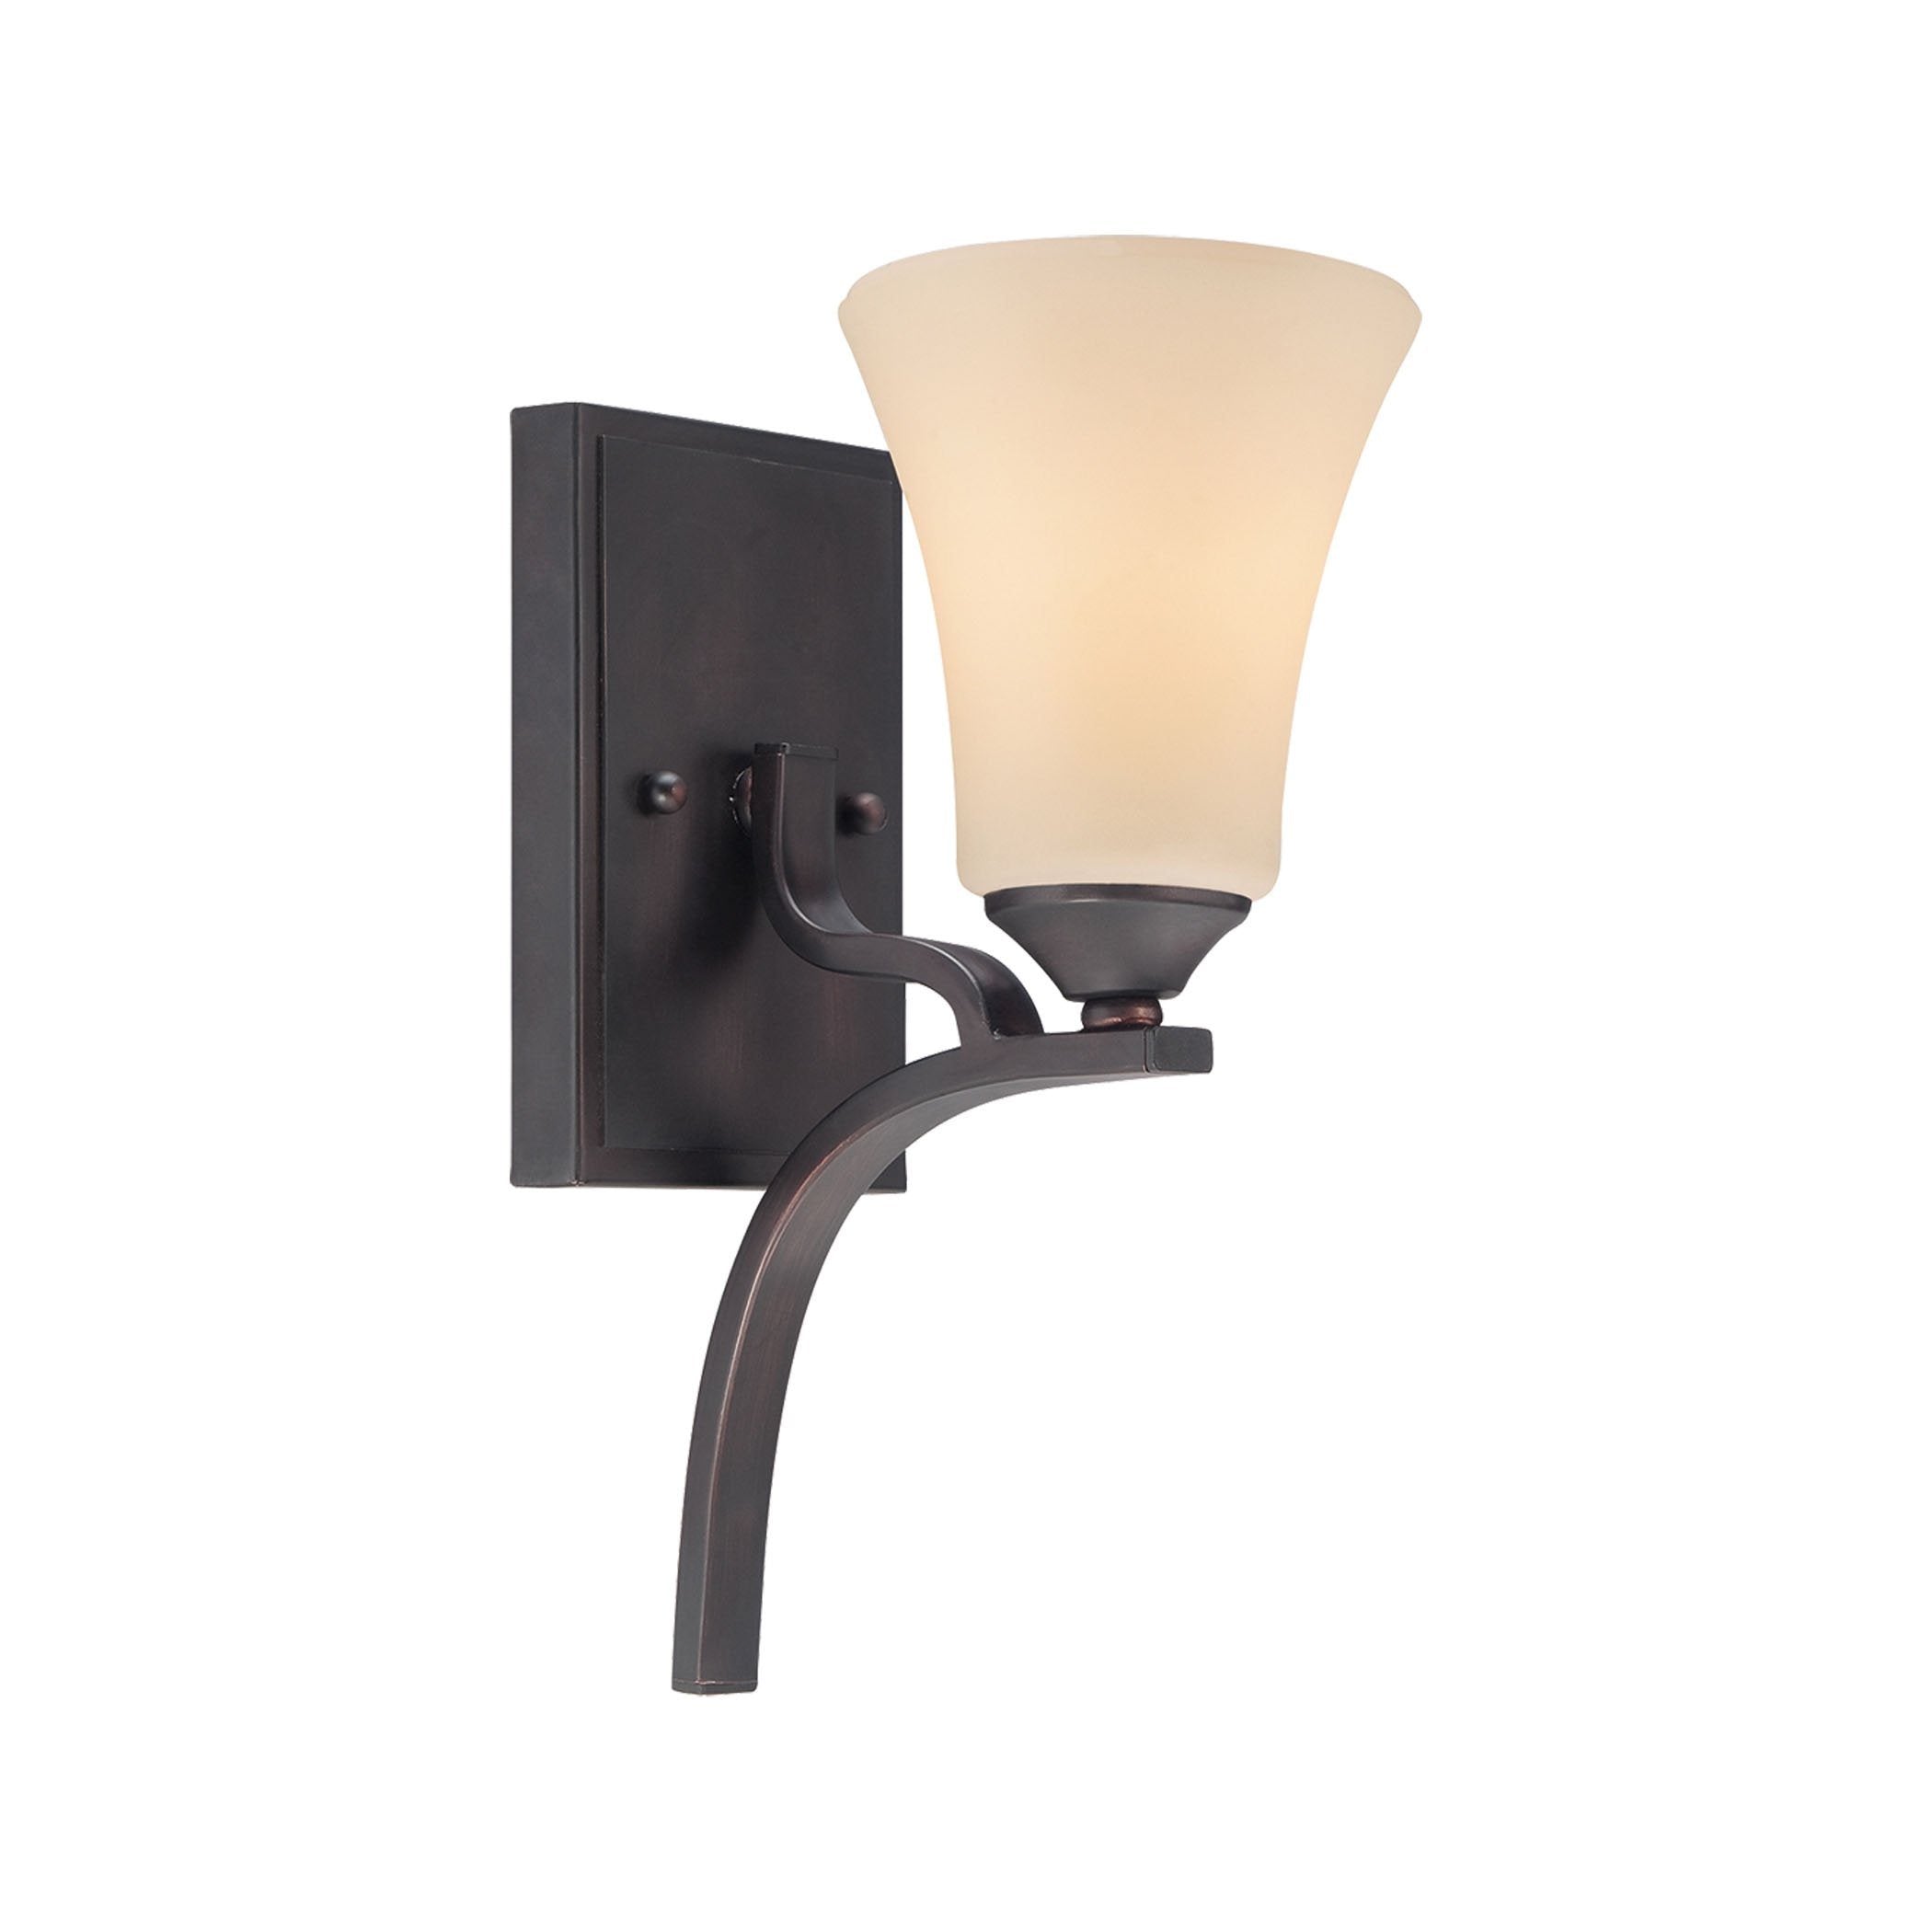 Treme Wall Sconce in Espresso Wall Thomas Lighting 